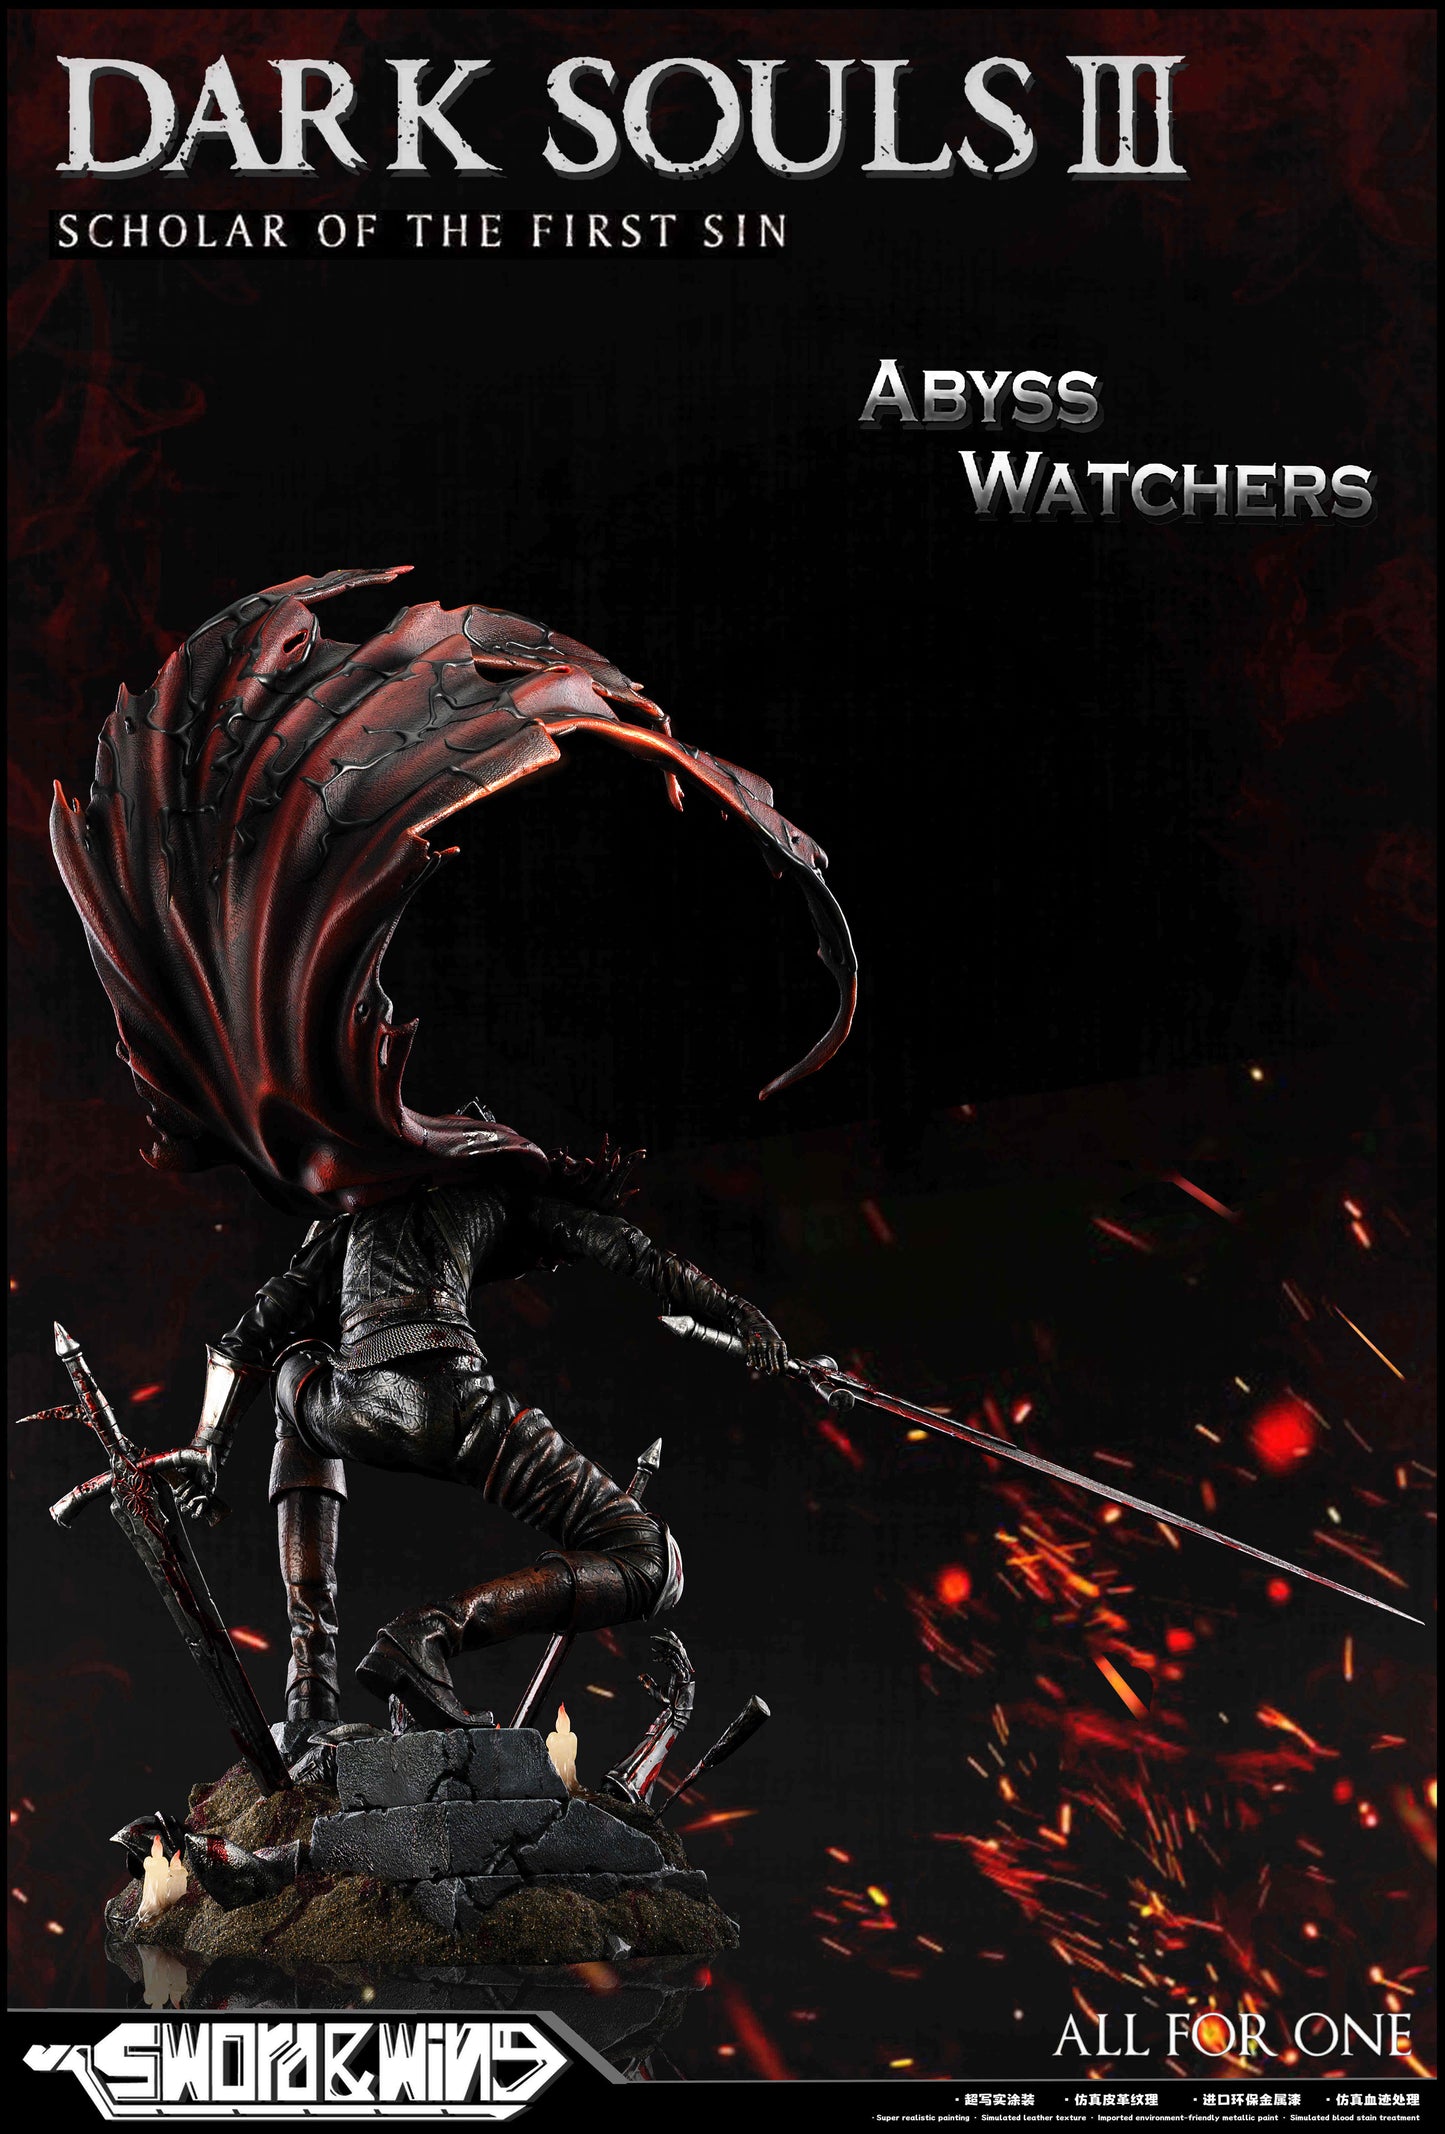 SWORD & WING STUDIO – DARK SOULS 3: ABYSS WATCHERS [SOLD OUT]